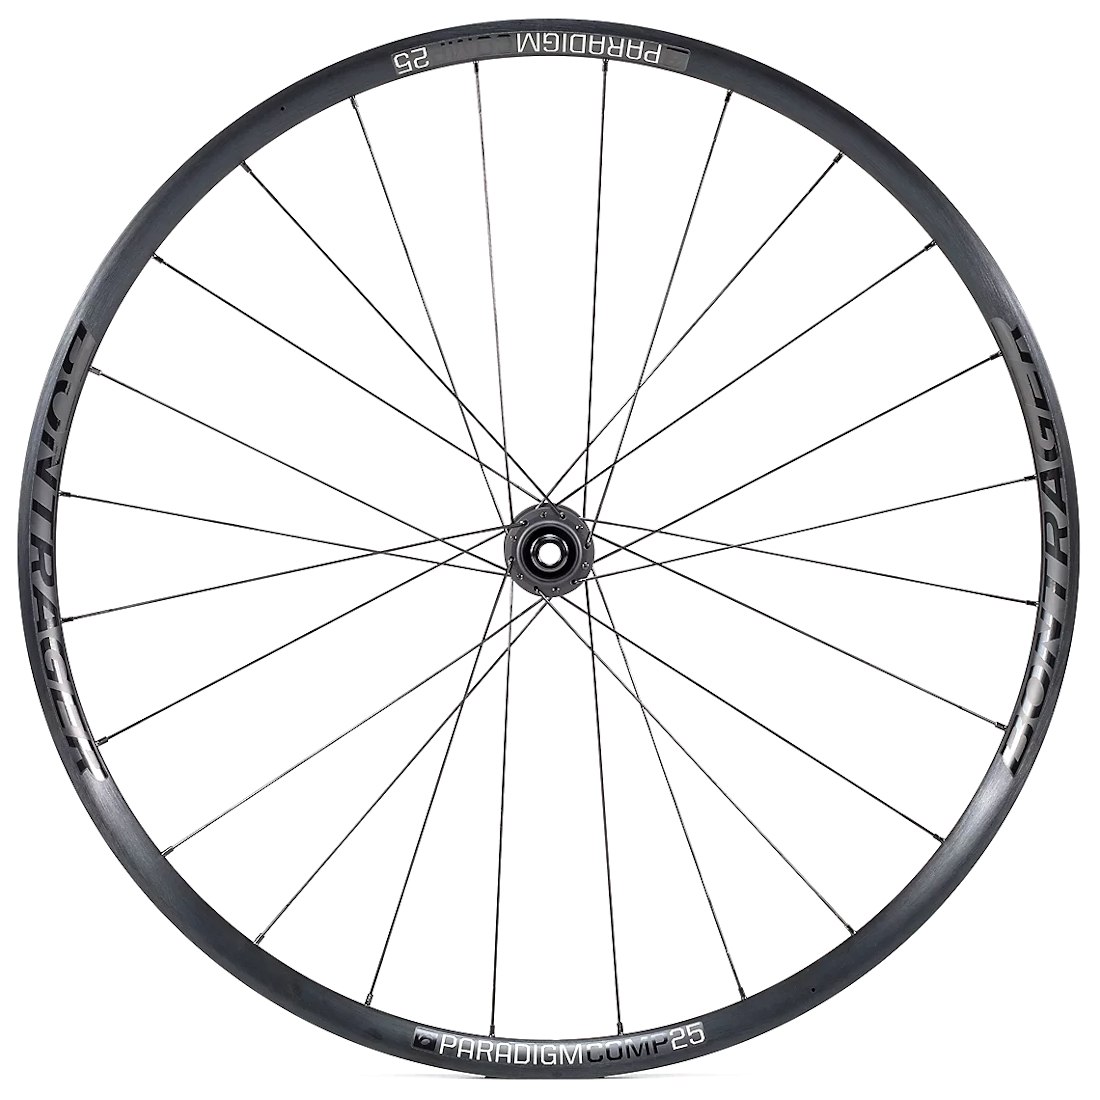 Picture of Bontrager Paradigm Comp 25 TLR Disc Road Front Wheel - Clincher - Centerlock - 12x100mm